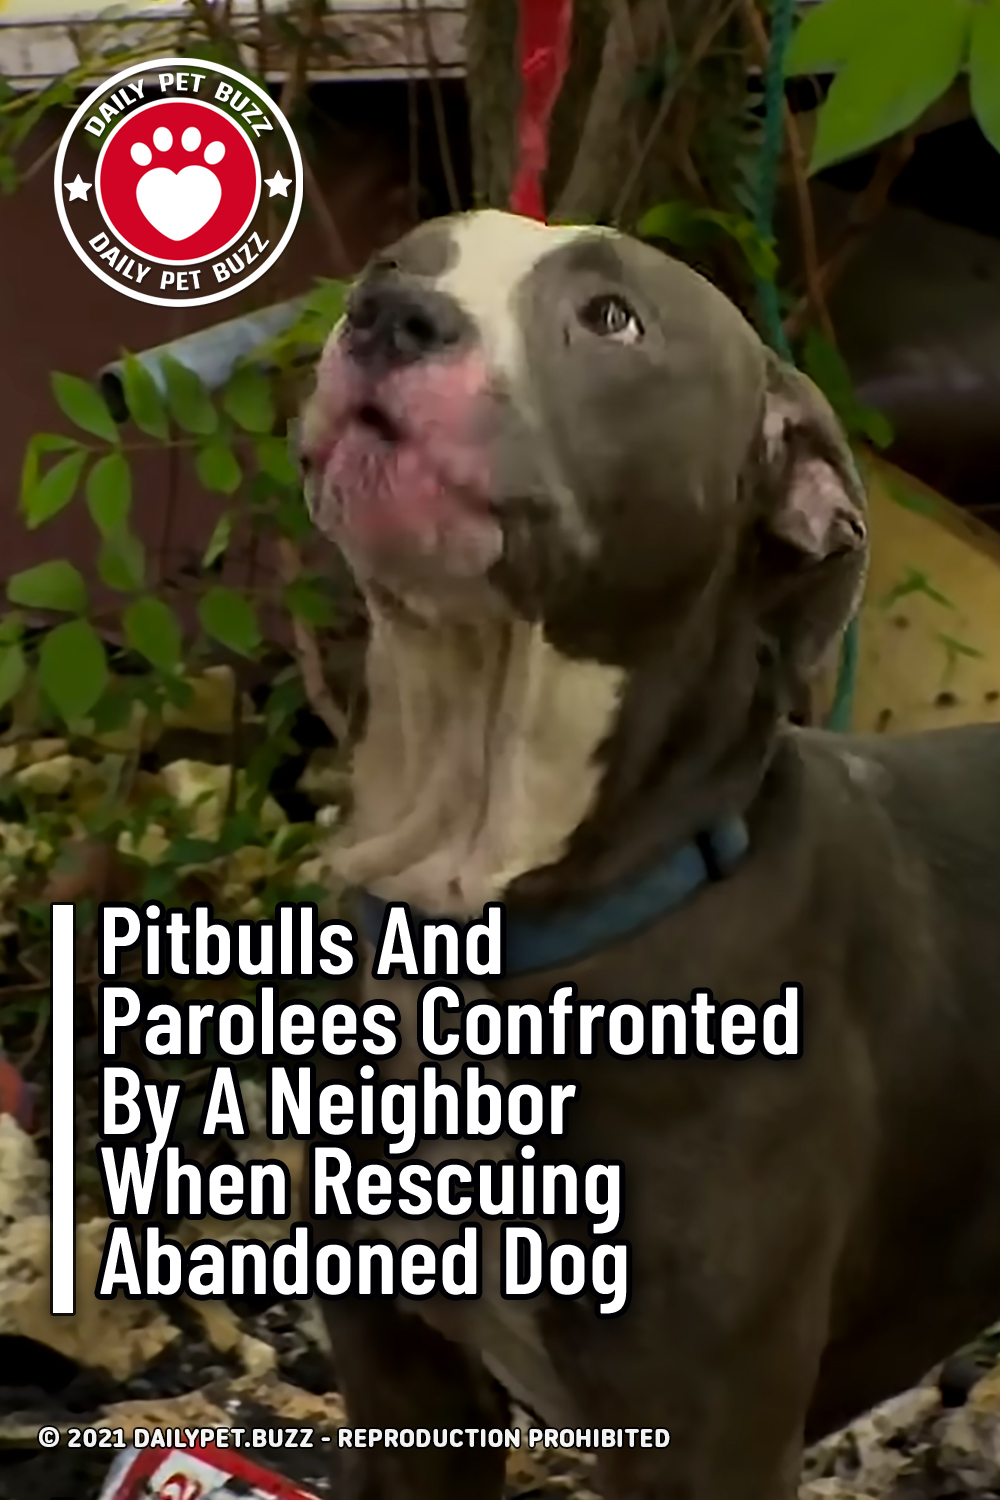 Pitbulls And Parolees Confronted By A Neighbor When Rescuing Abandoned Dog